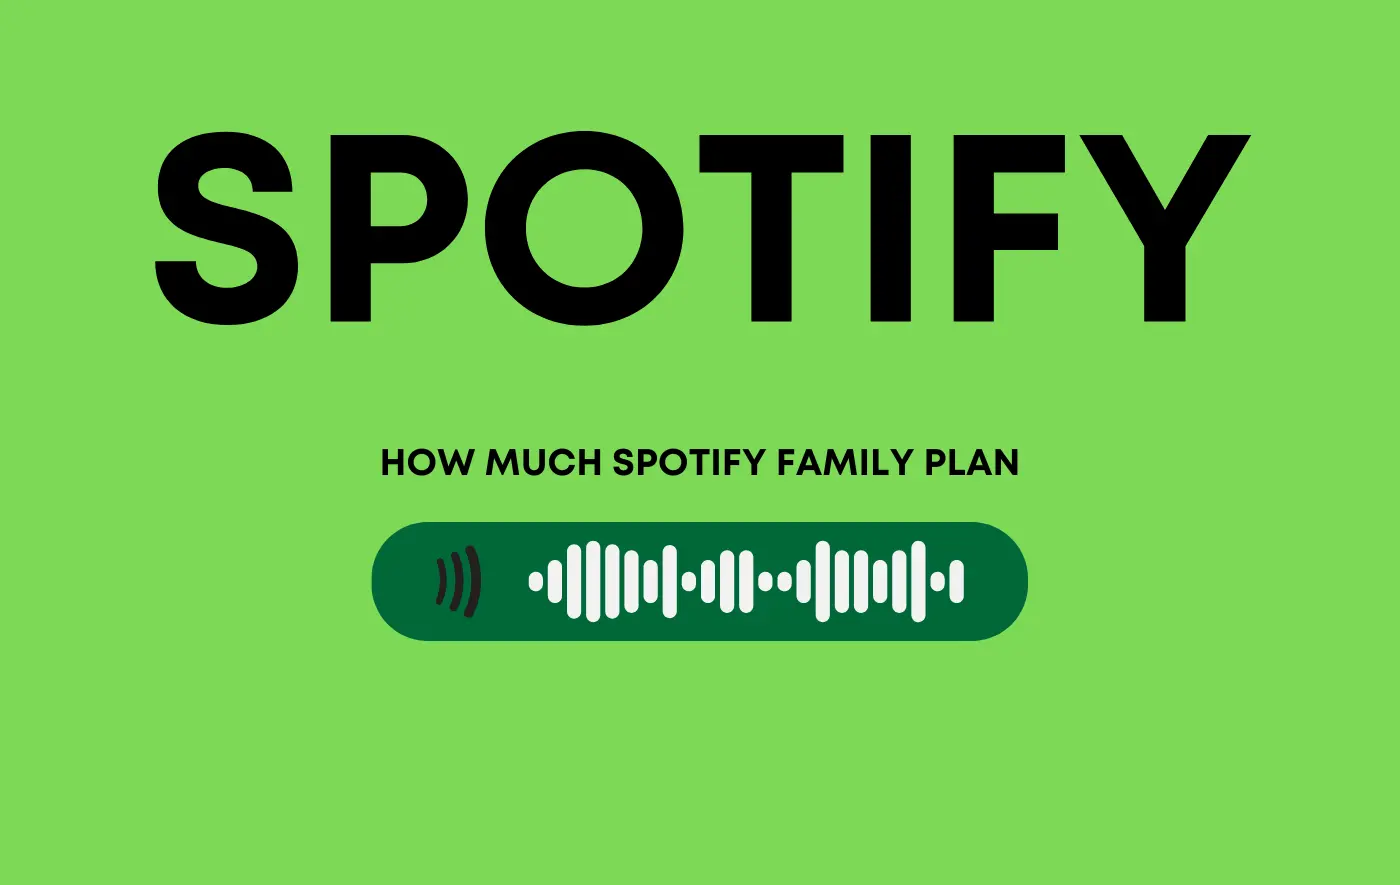 How much Spotify Family Plan